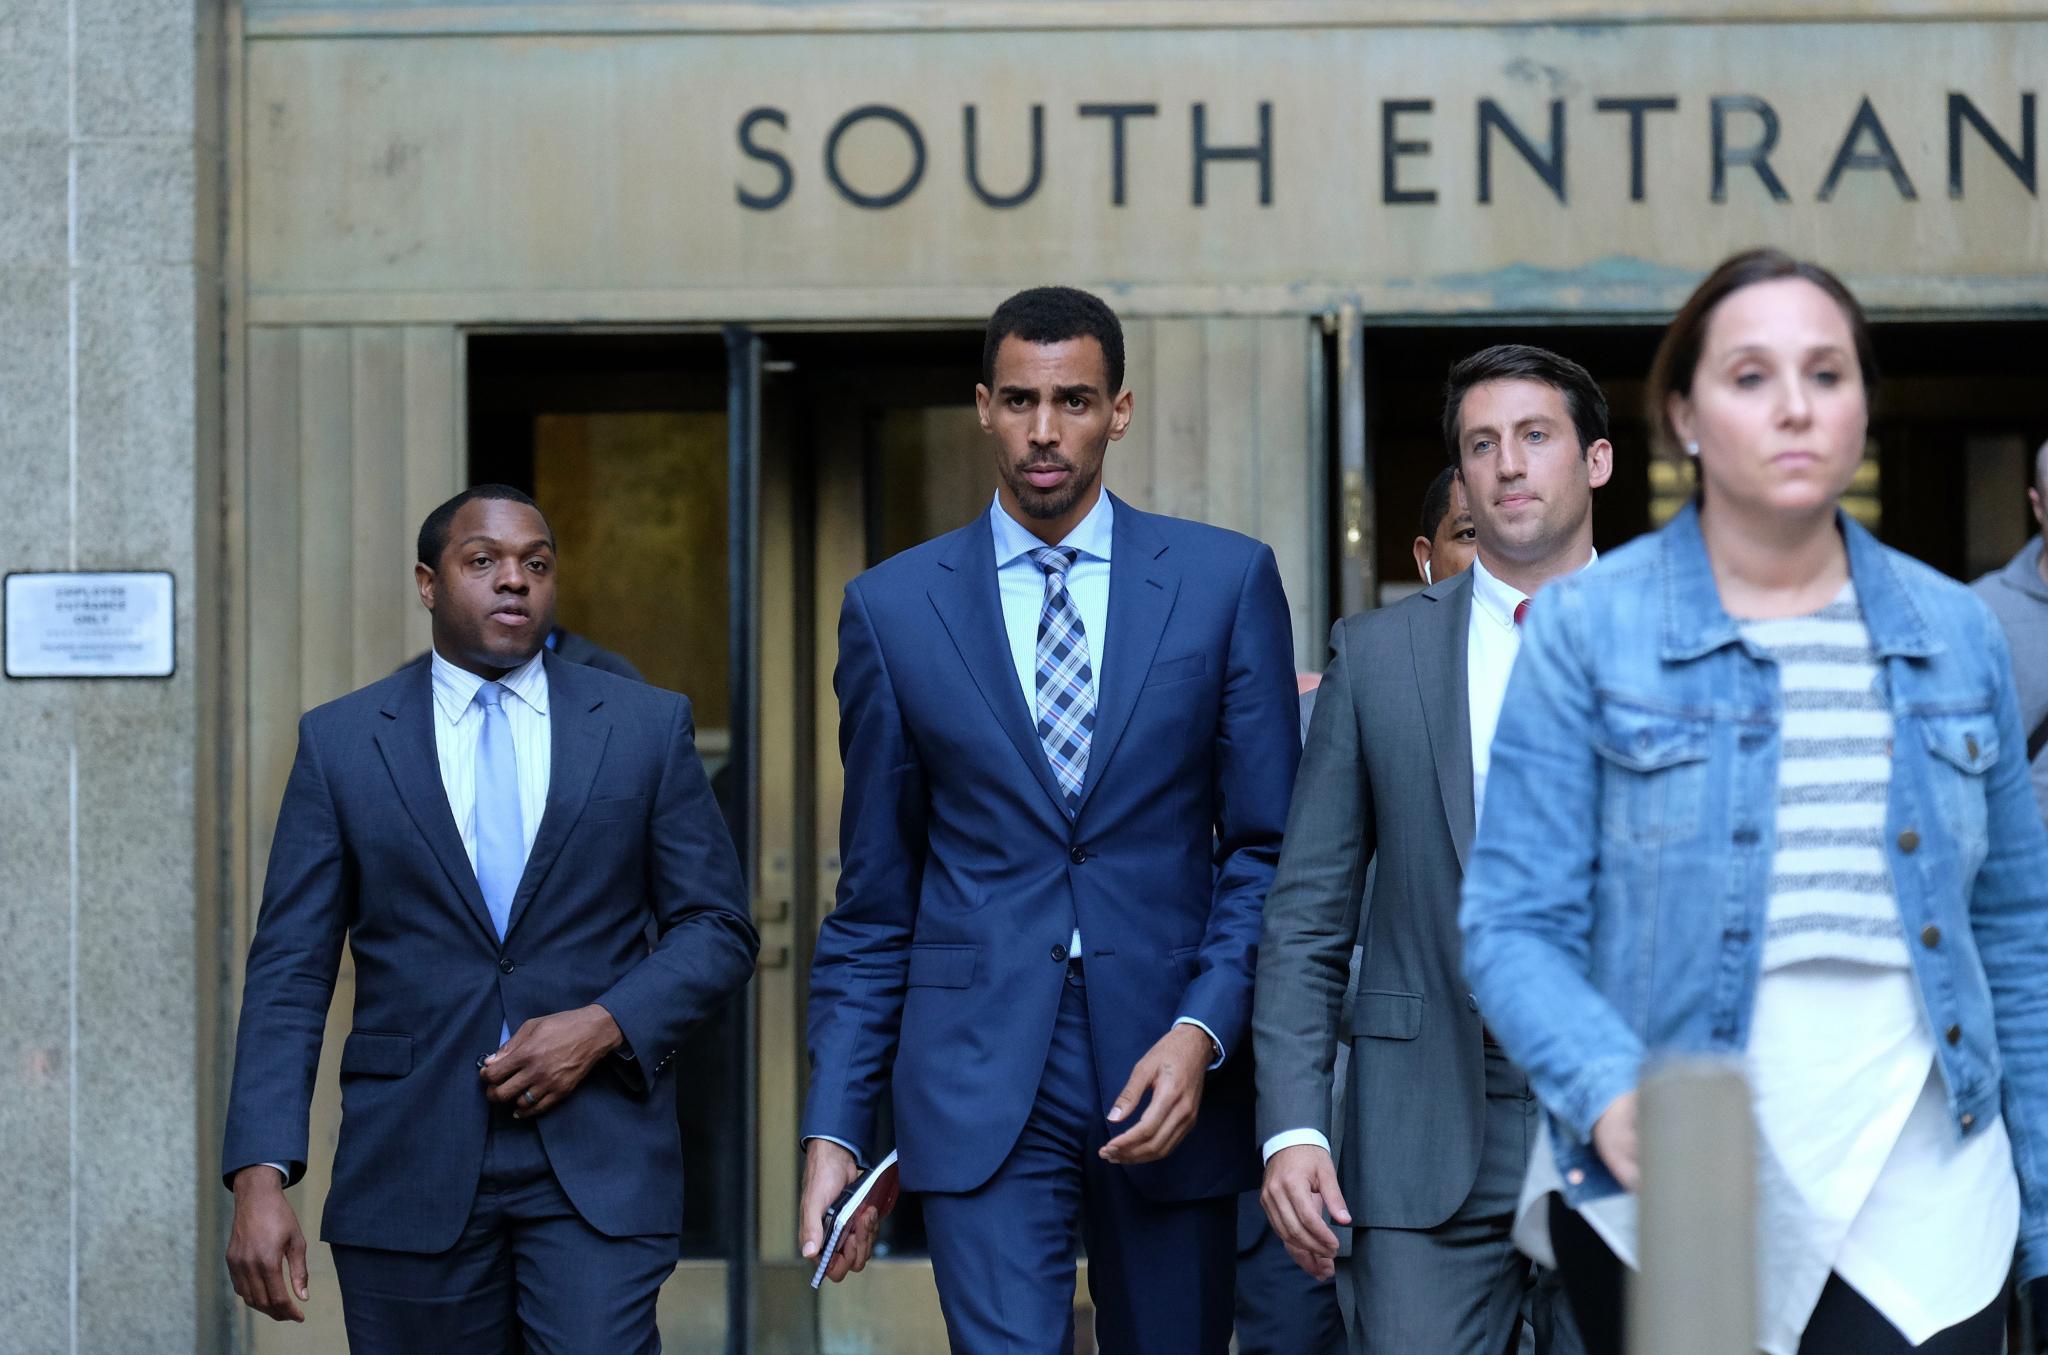 Judge Drops Charges Against NBA Star Thabo Sefolosha Six Months After Arrest